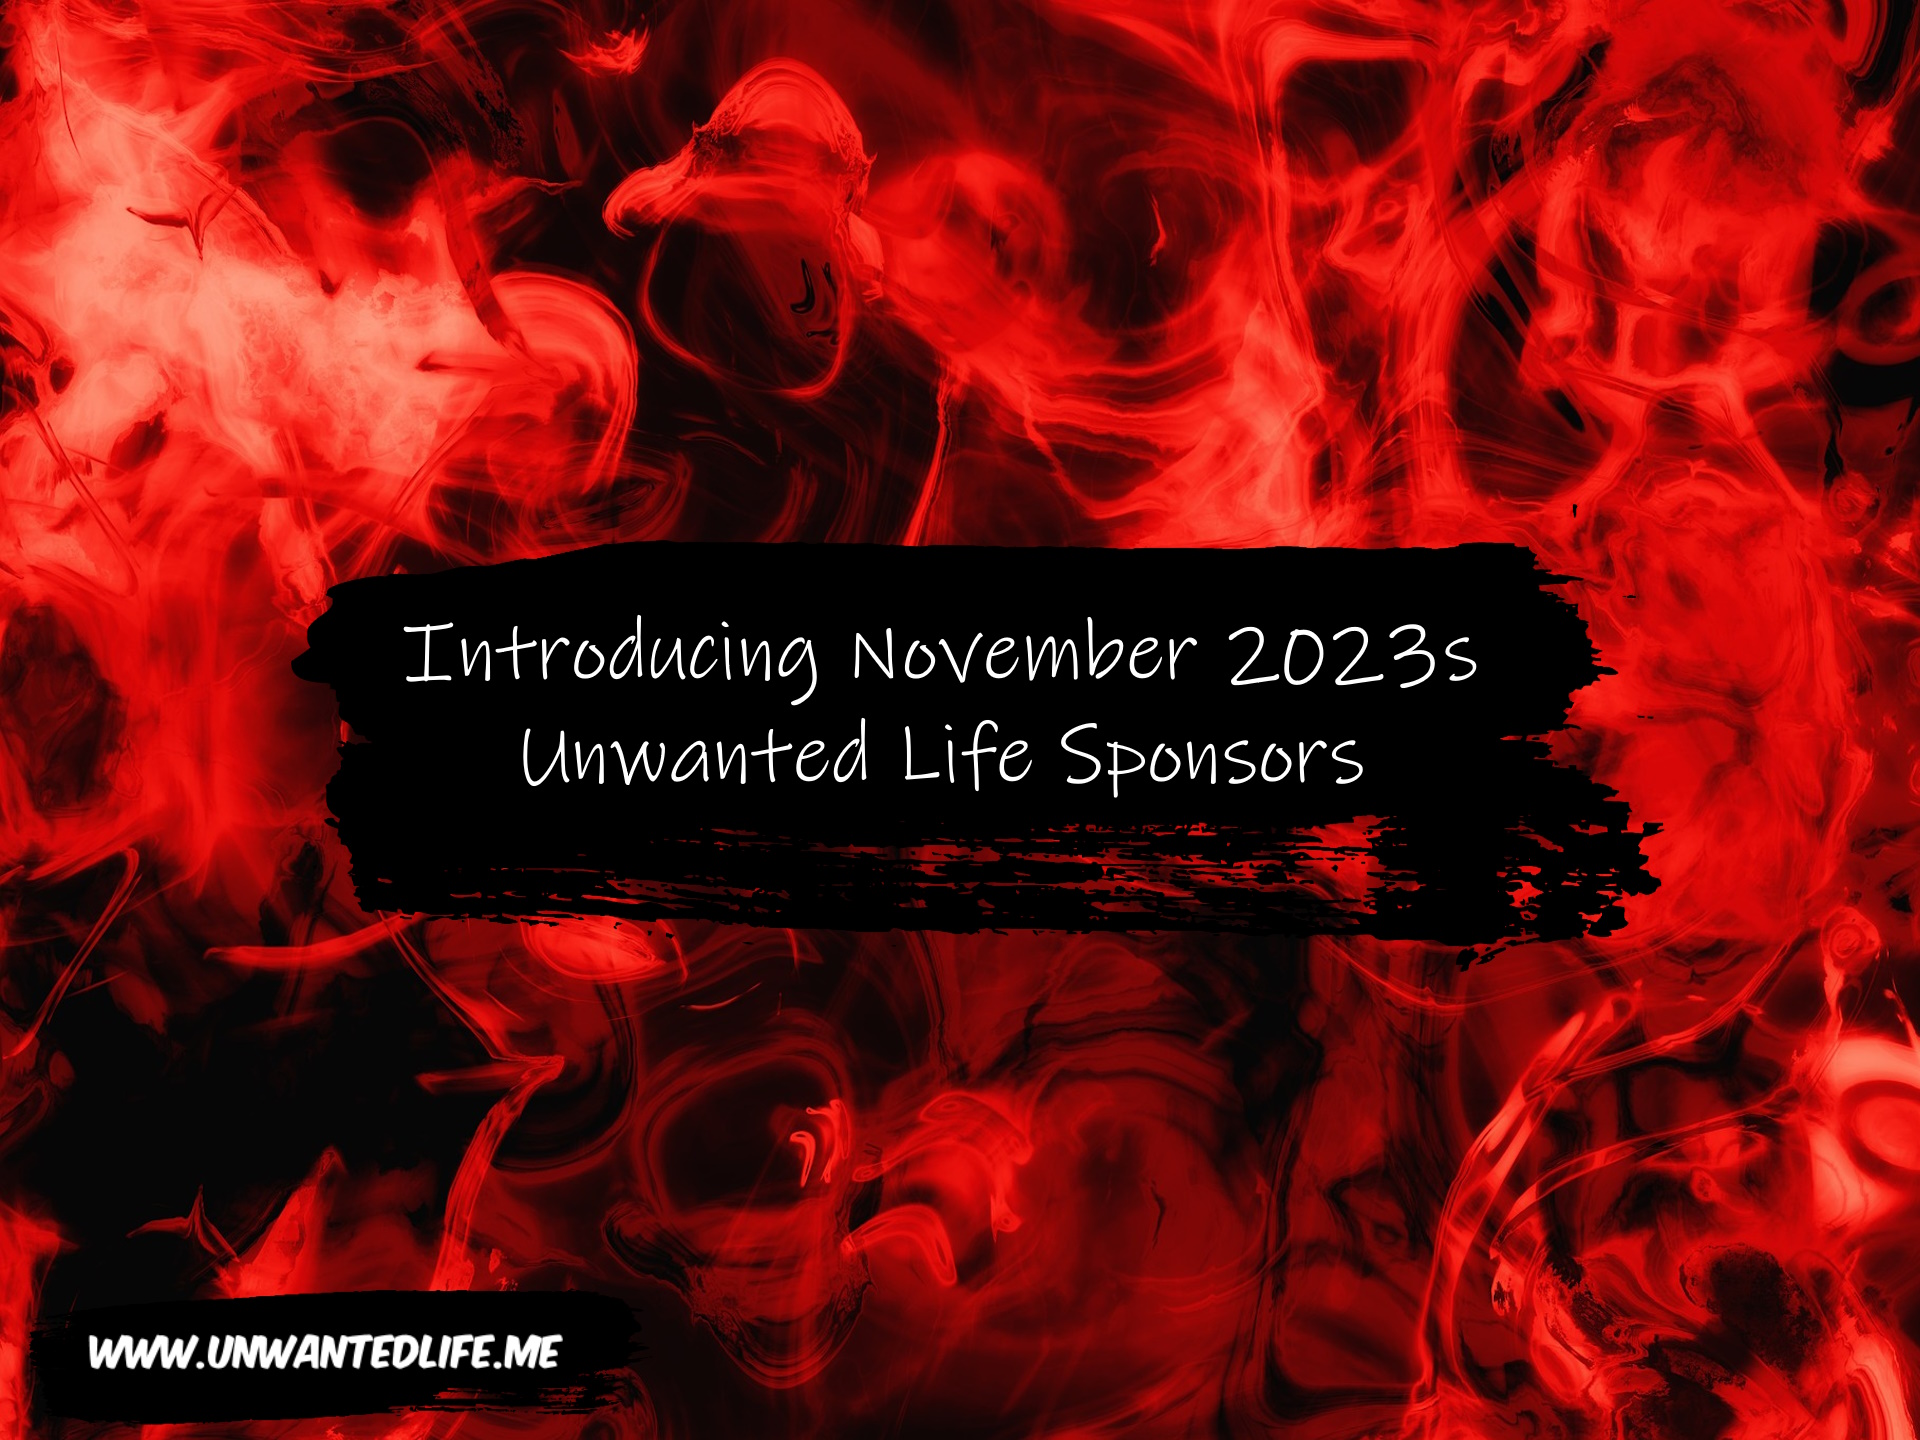 A red fiery background to represent the topic of the article - Introducing November 2023s Unwanted Life Sponsors